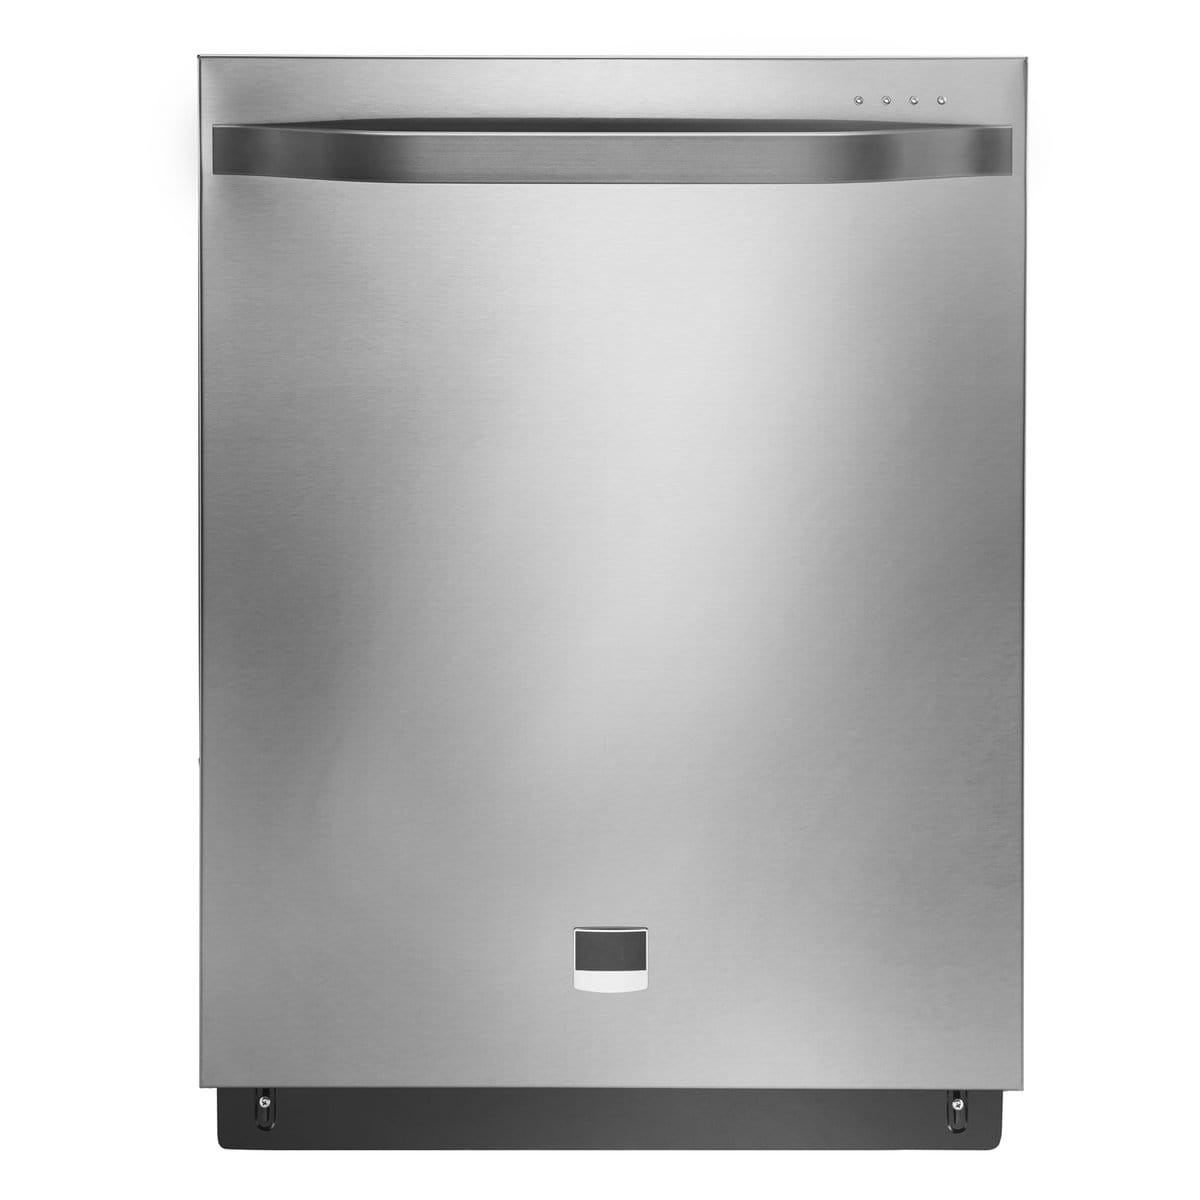 24 Inch Fully Integrated Dishwasher Machine Isolated on White Background. Front View of Modern Stainless Steel Built-In Dishwasher Range. Domestic and Kitchen Major Appliances